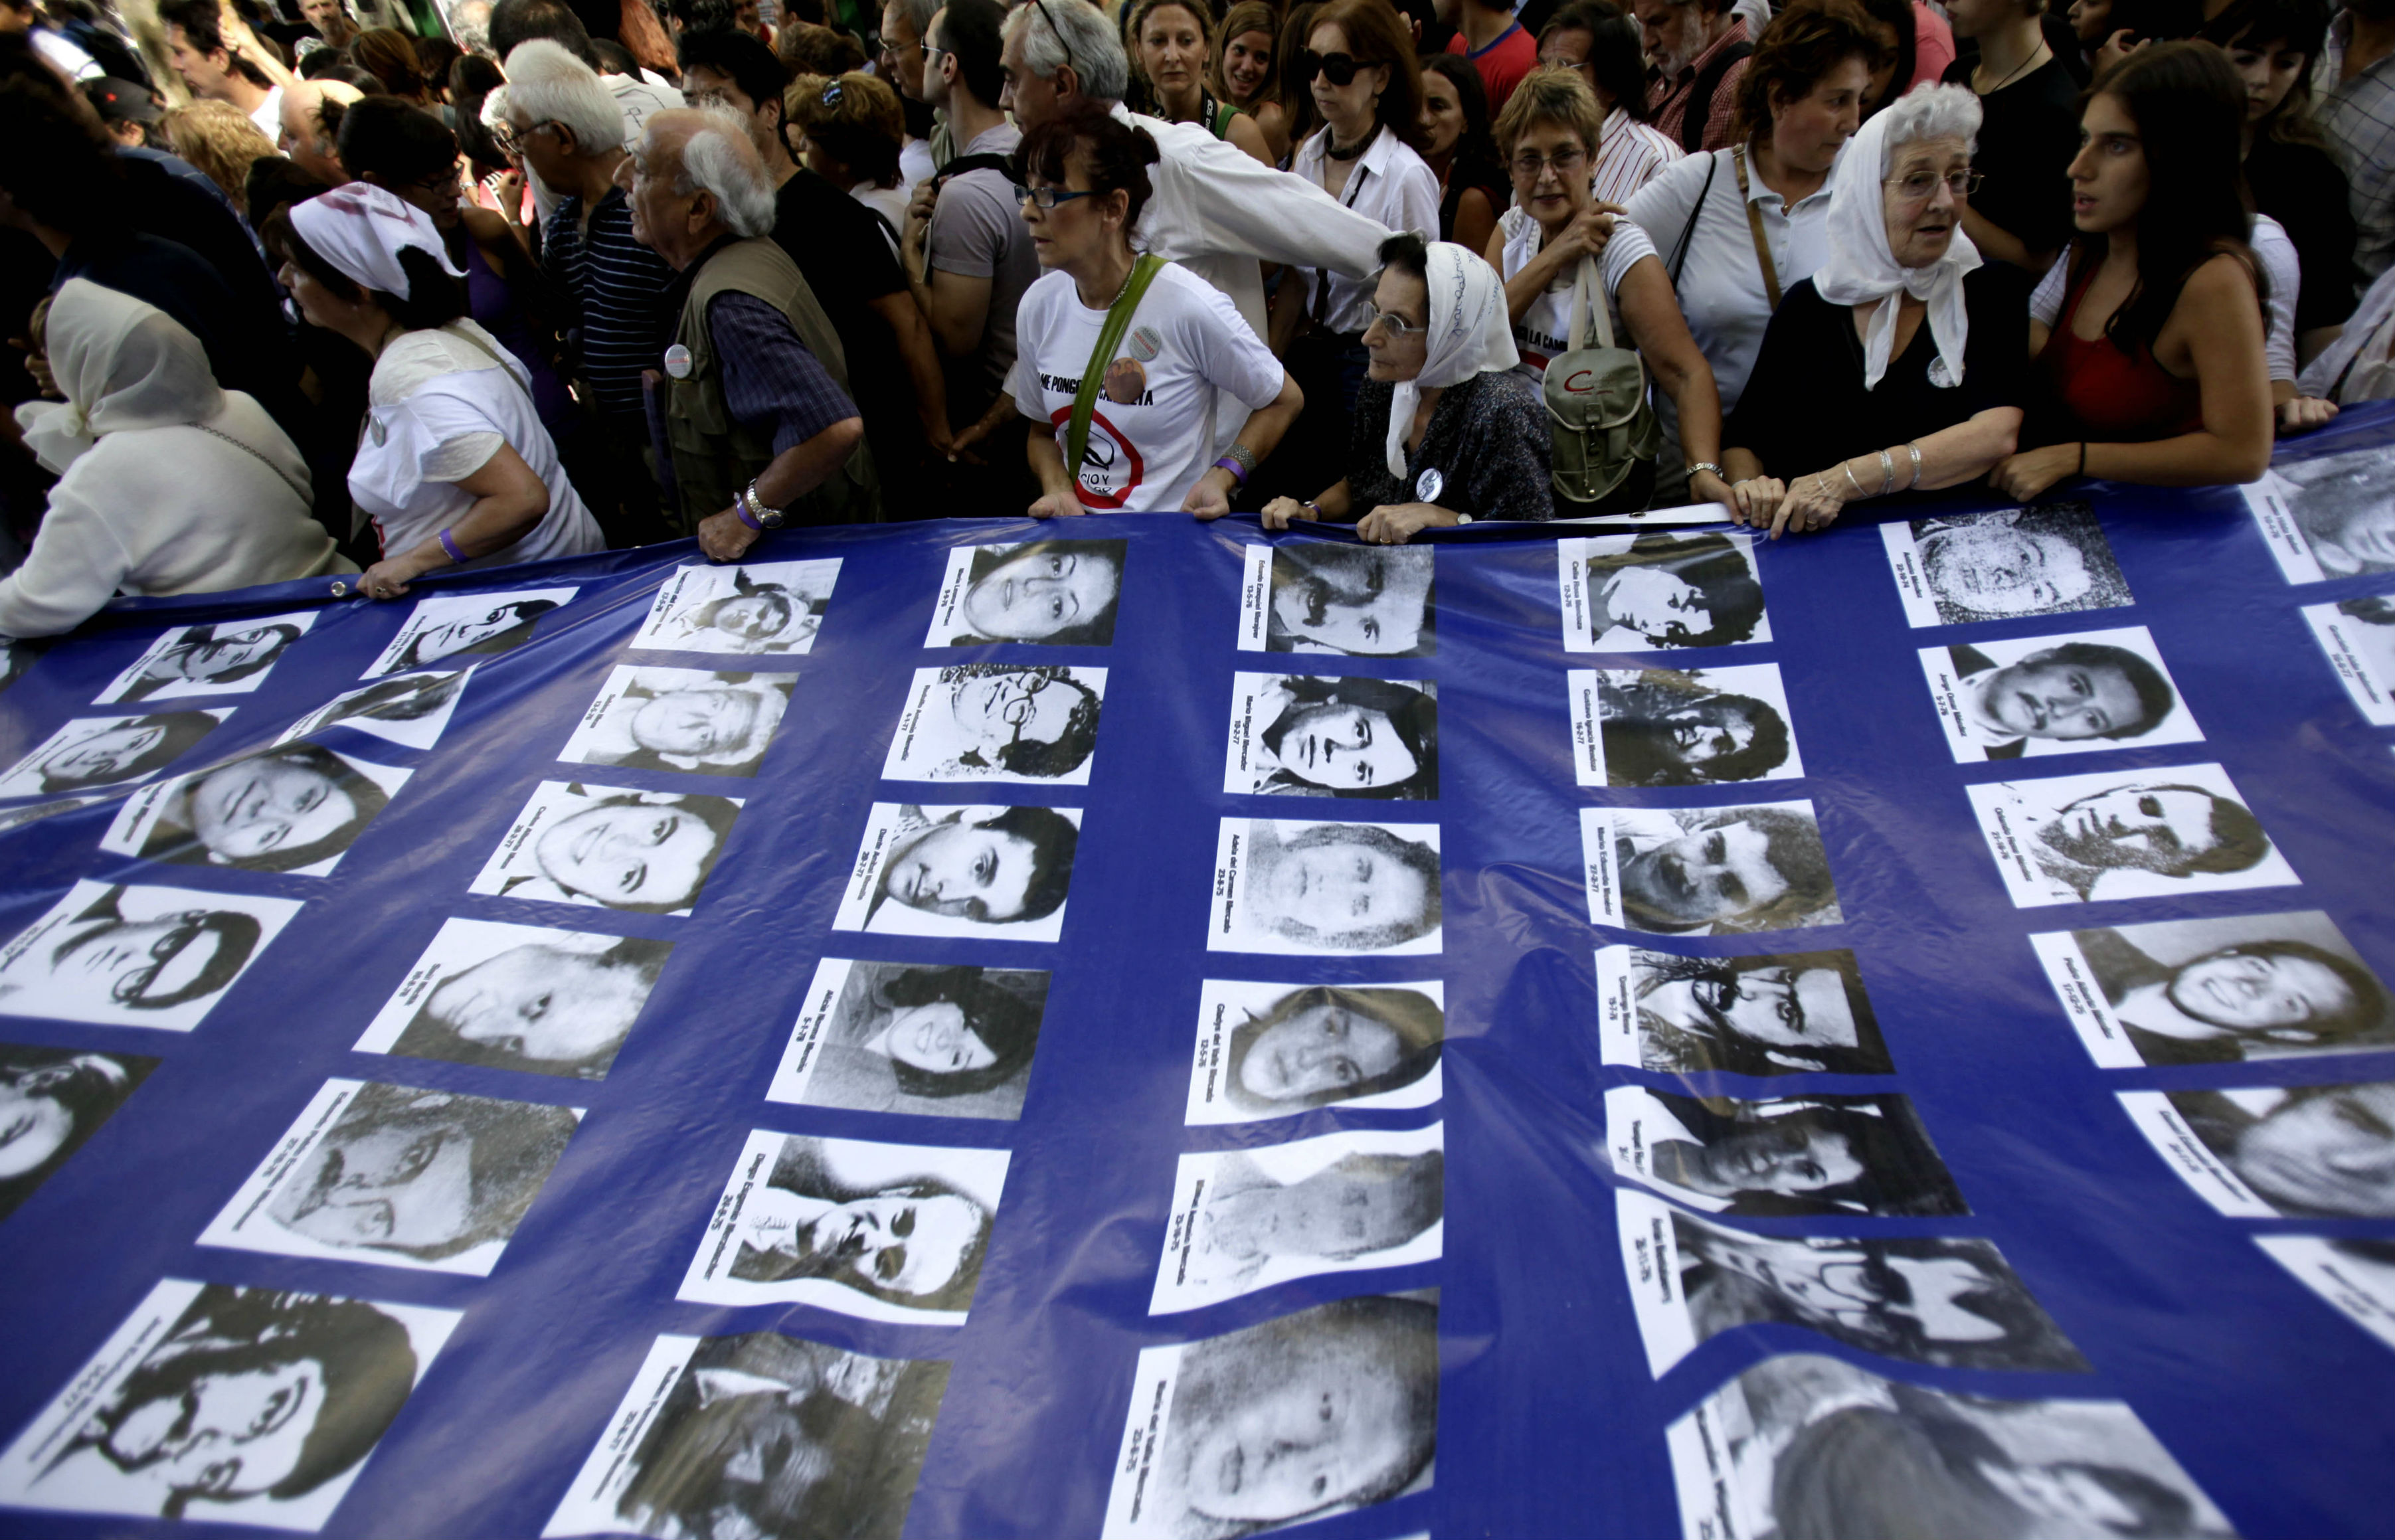 Vatican to open archives on Argentina's 'dirty war'